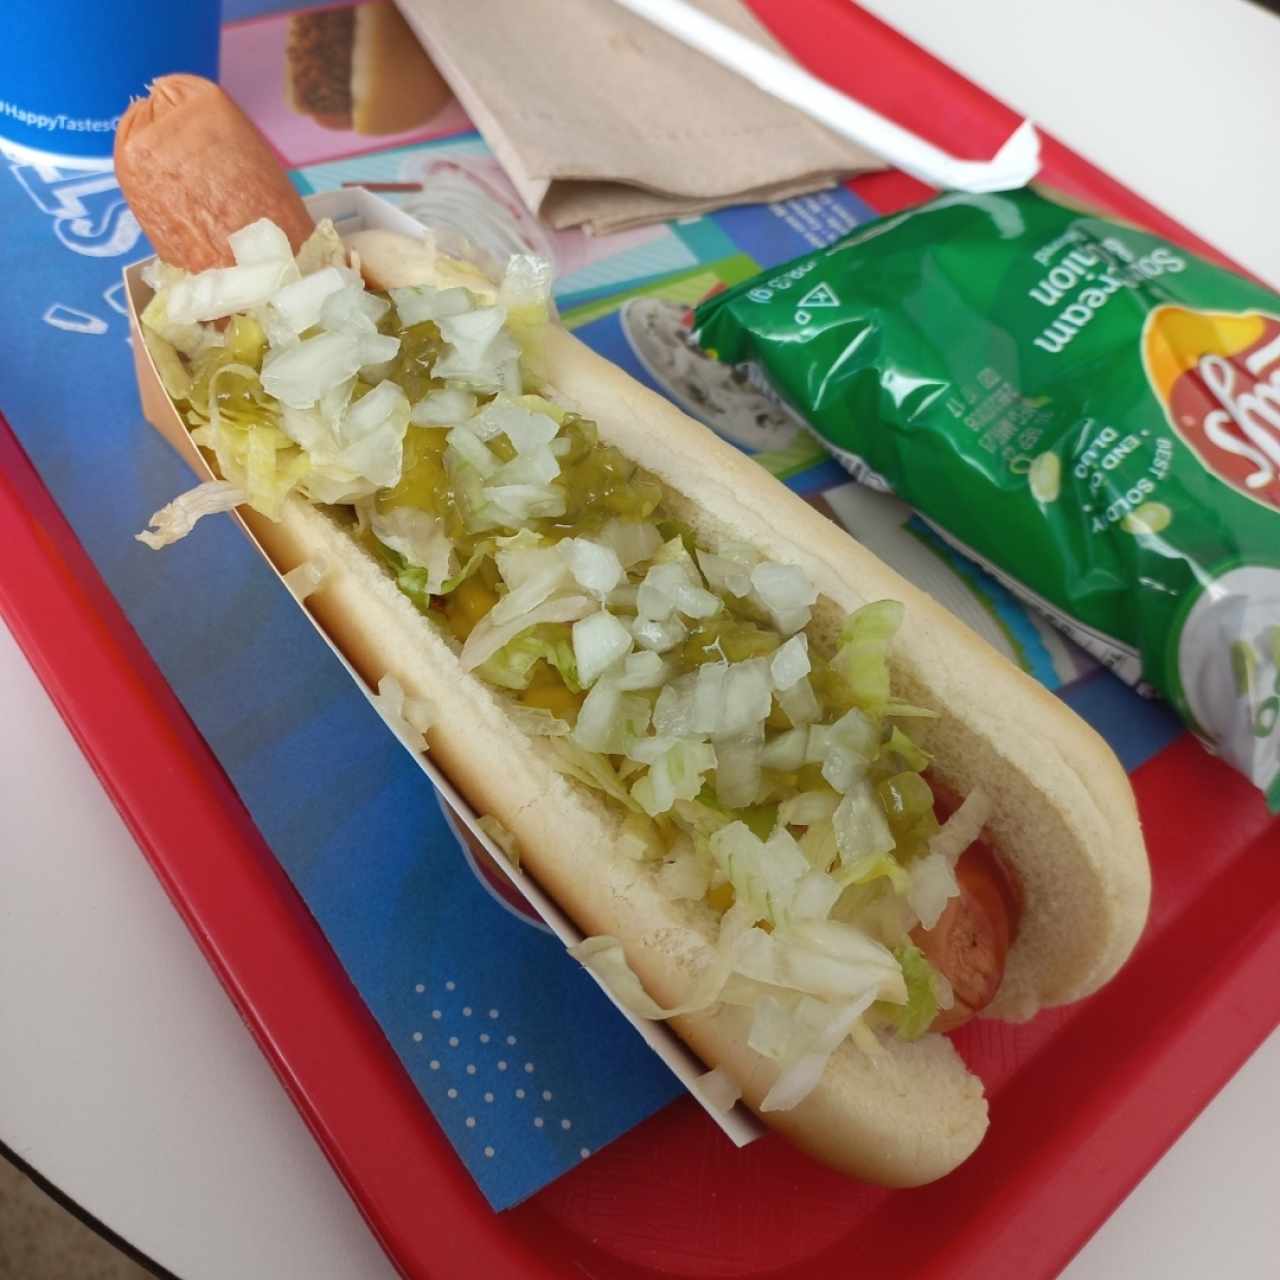 Hot dog Deluxe combo